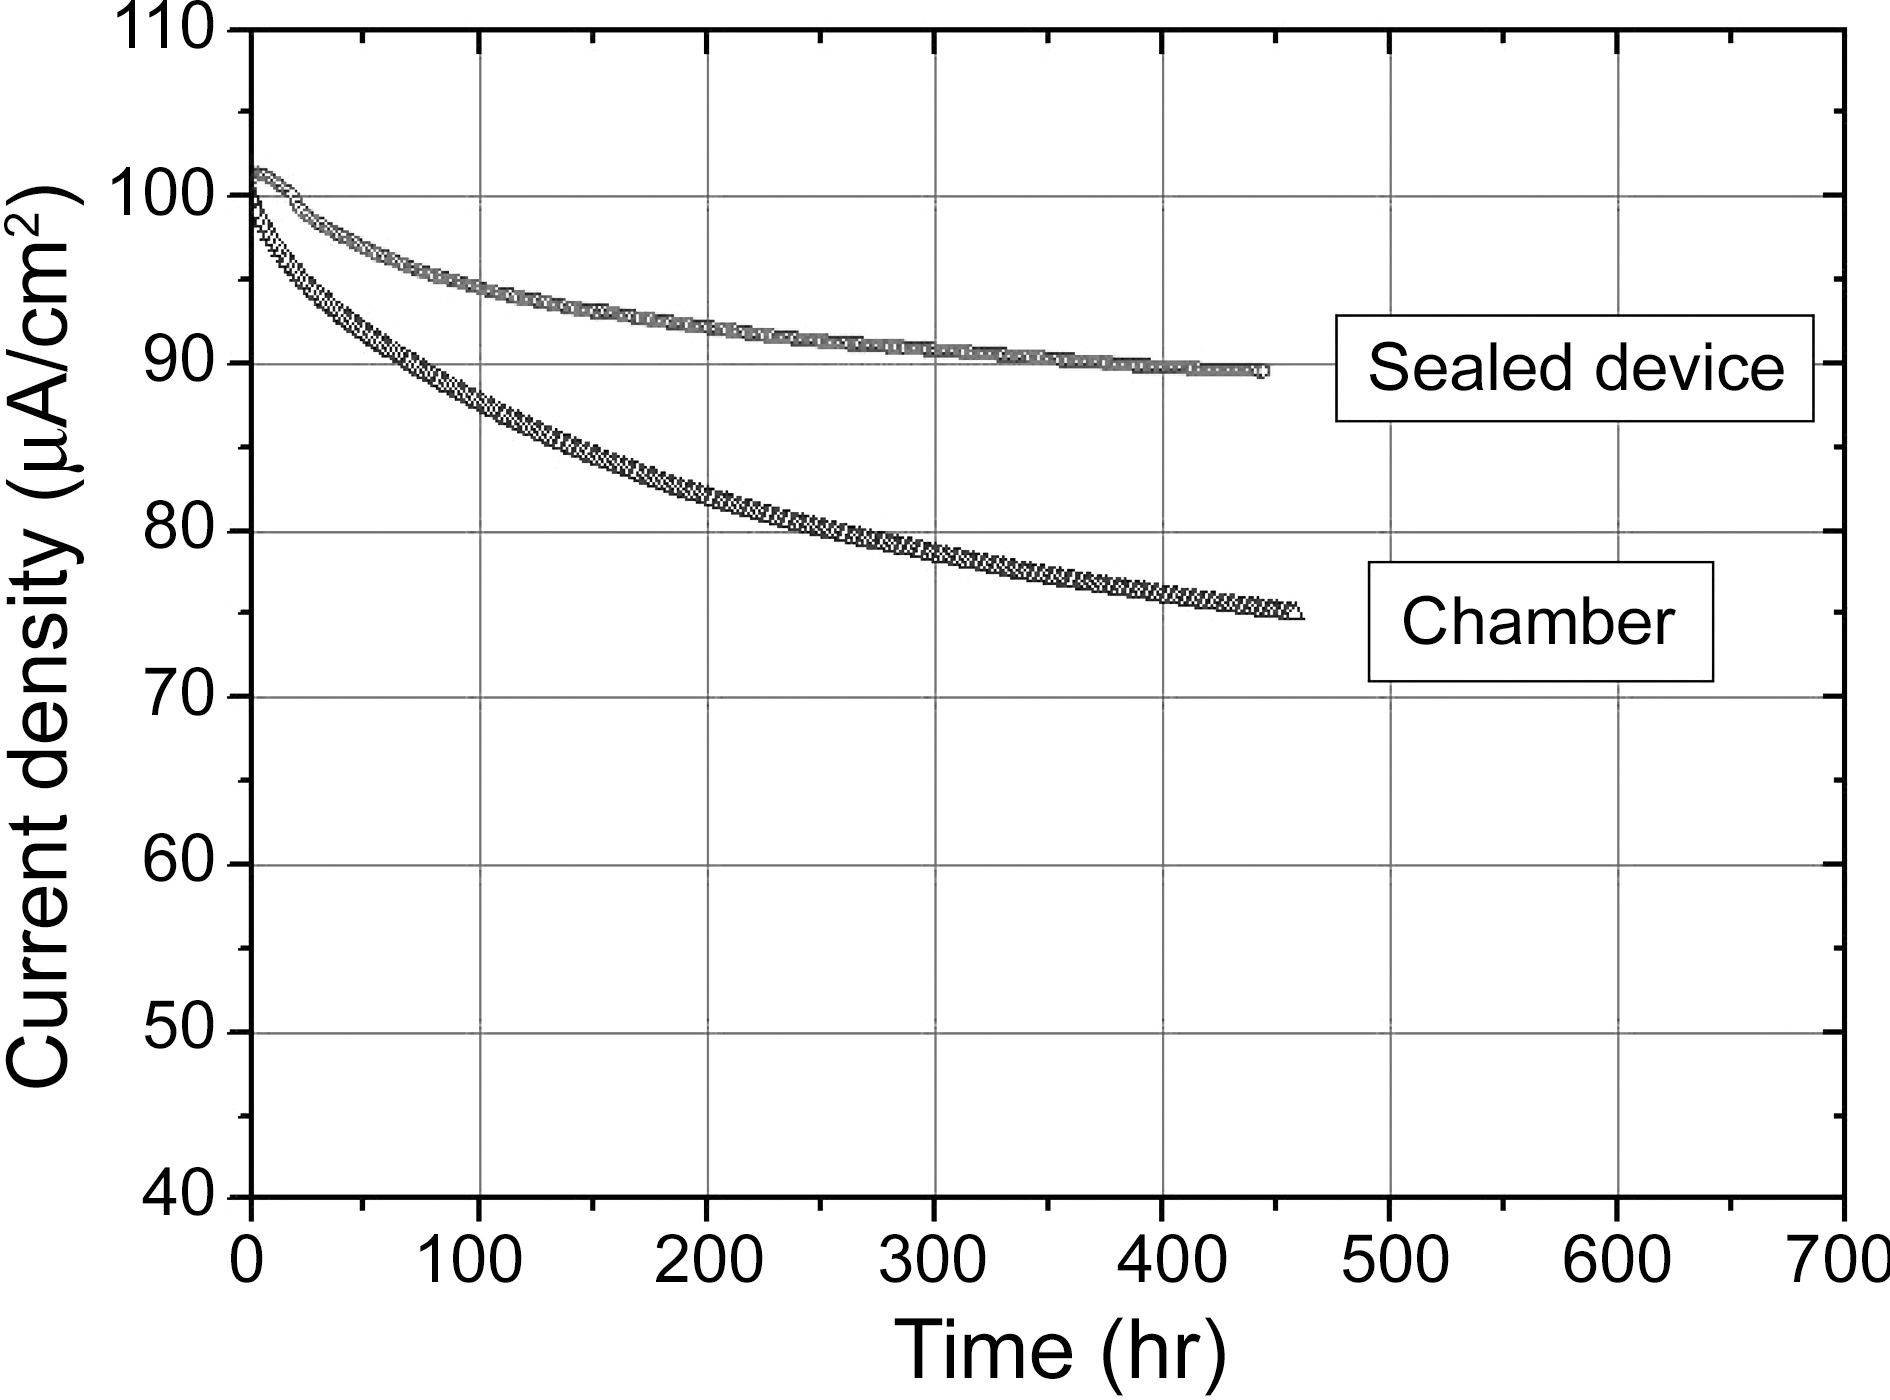 Emission current density vs. time characteristics of CNT paste emitters measured in vacuum chamber and sealed devices.